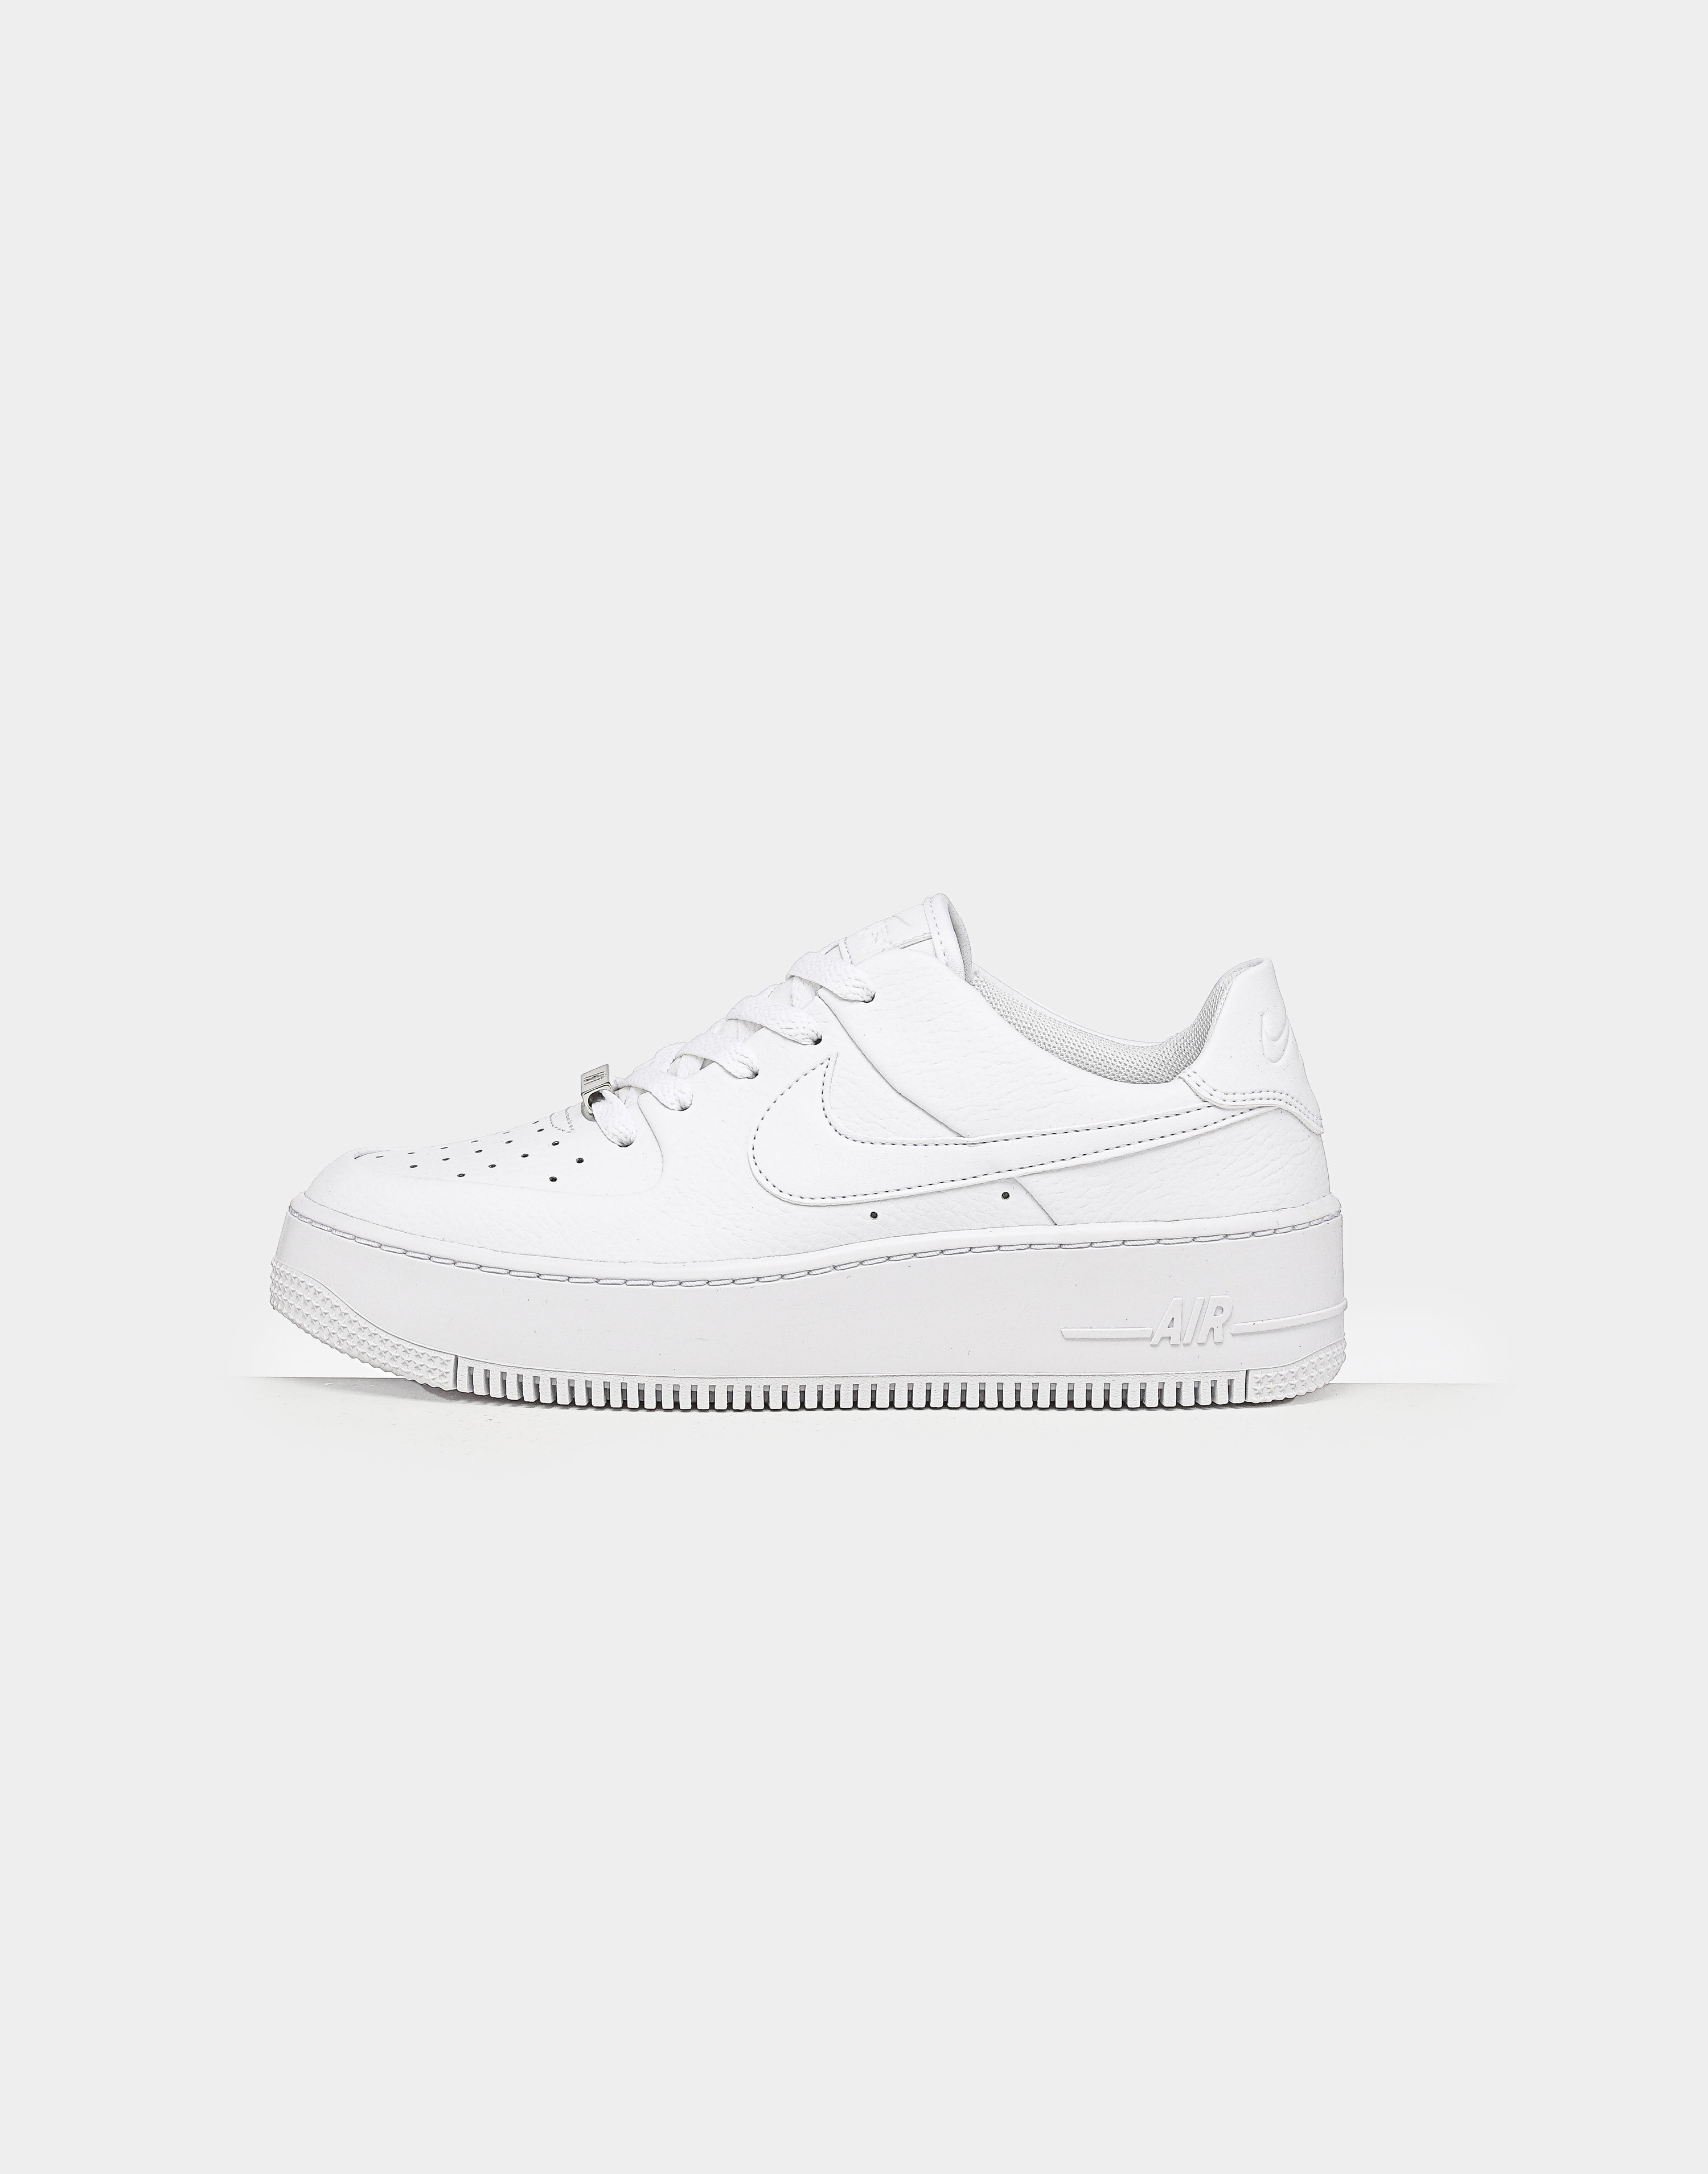 air force ones white womens size 8